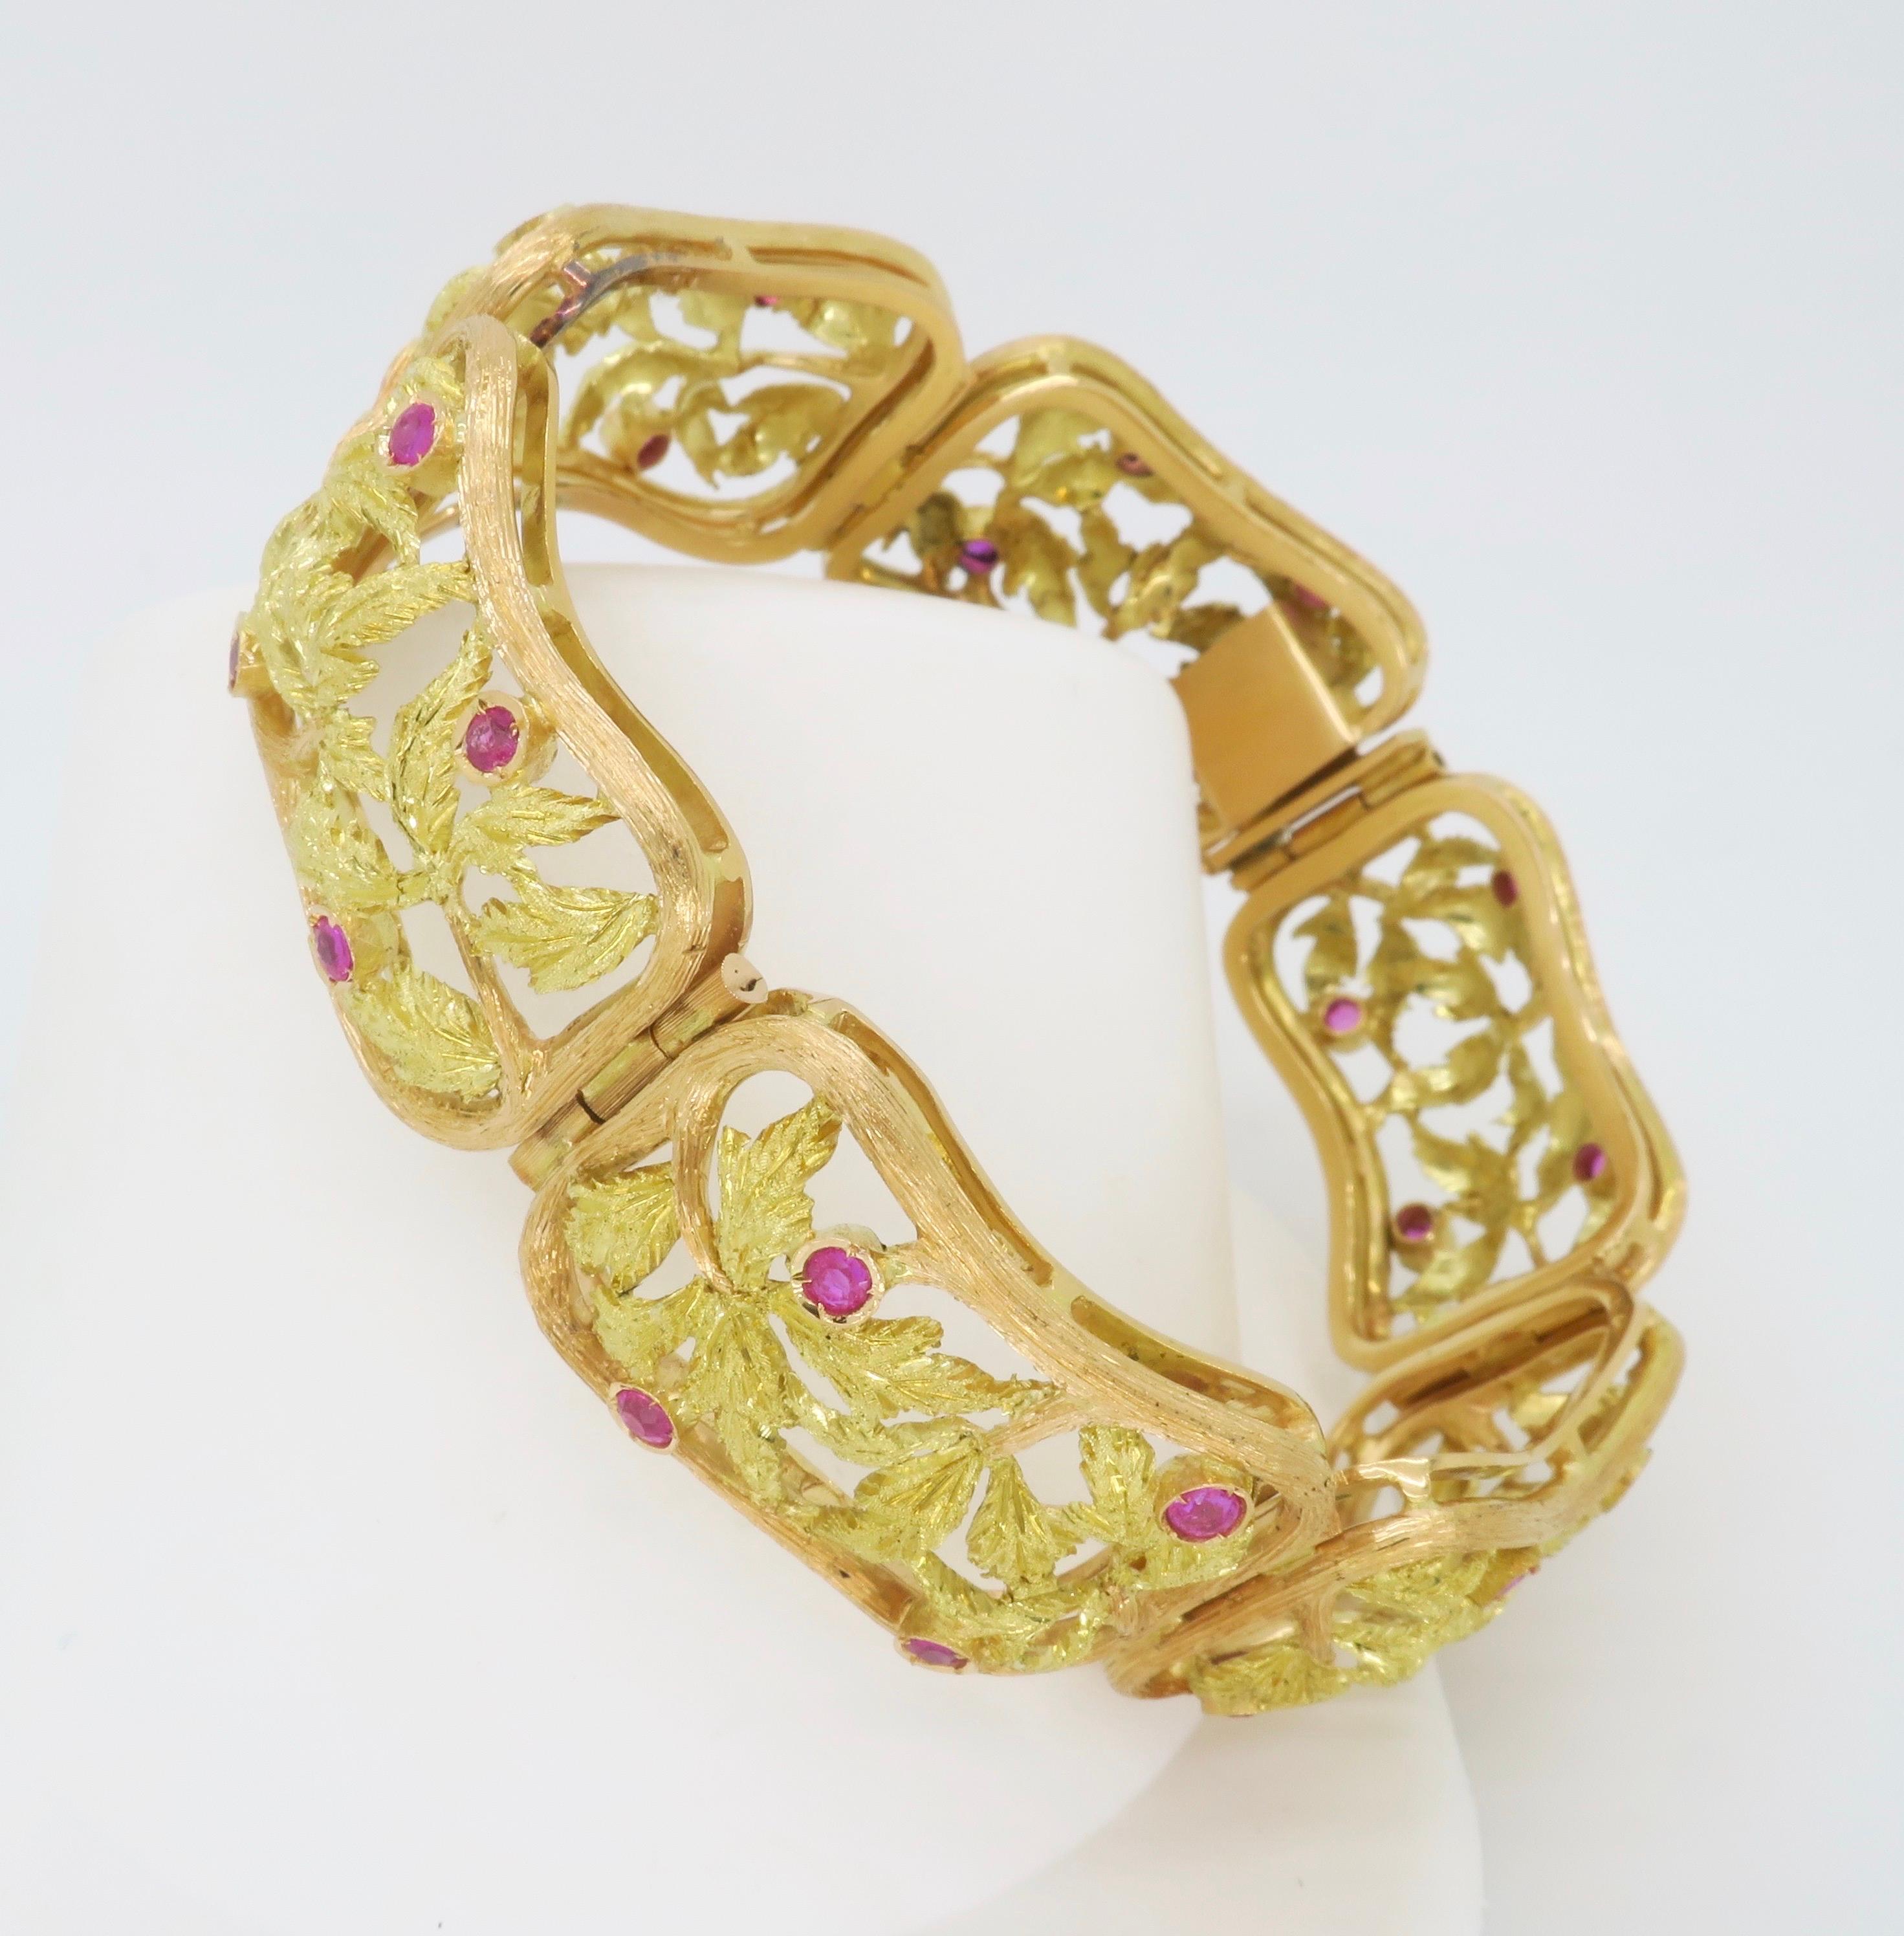 Stunning multi-colored 18k gold bracelet set with Rubies, with intricate detail. 

Gemstone: Ruby
Metal: 18k Yellow & Green Gold 
Stamped: 